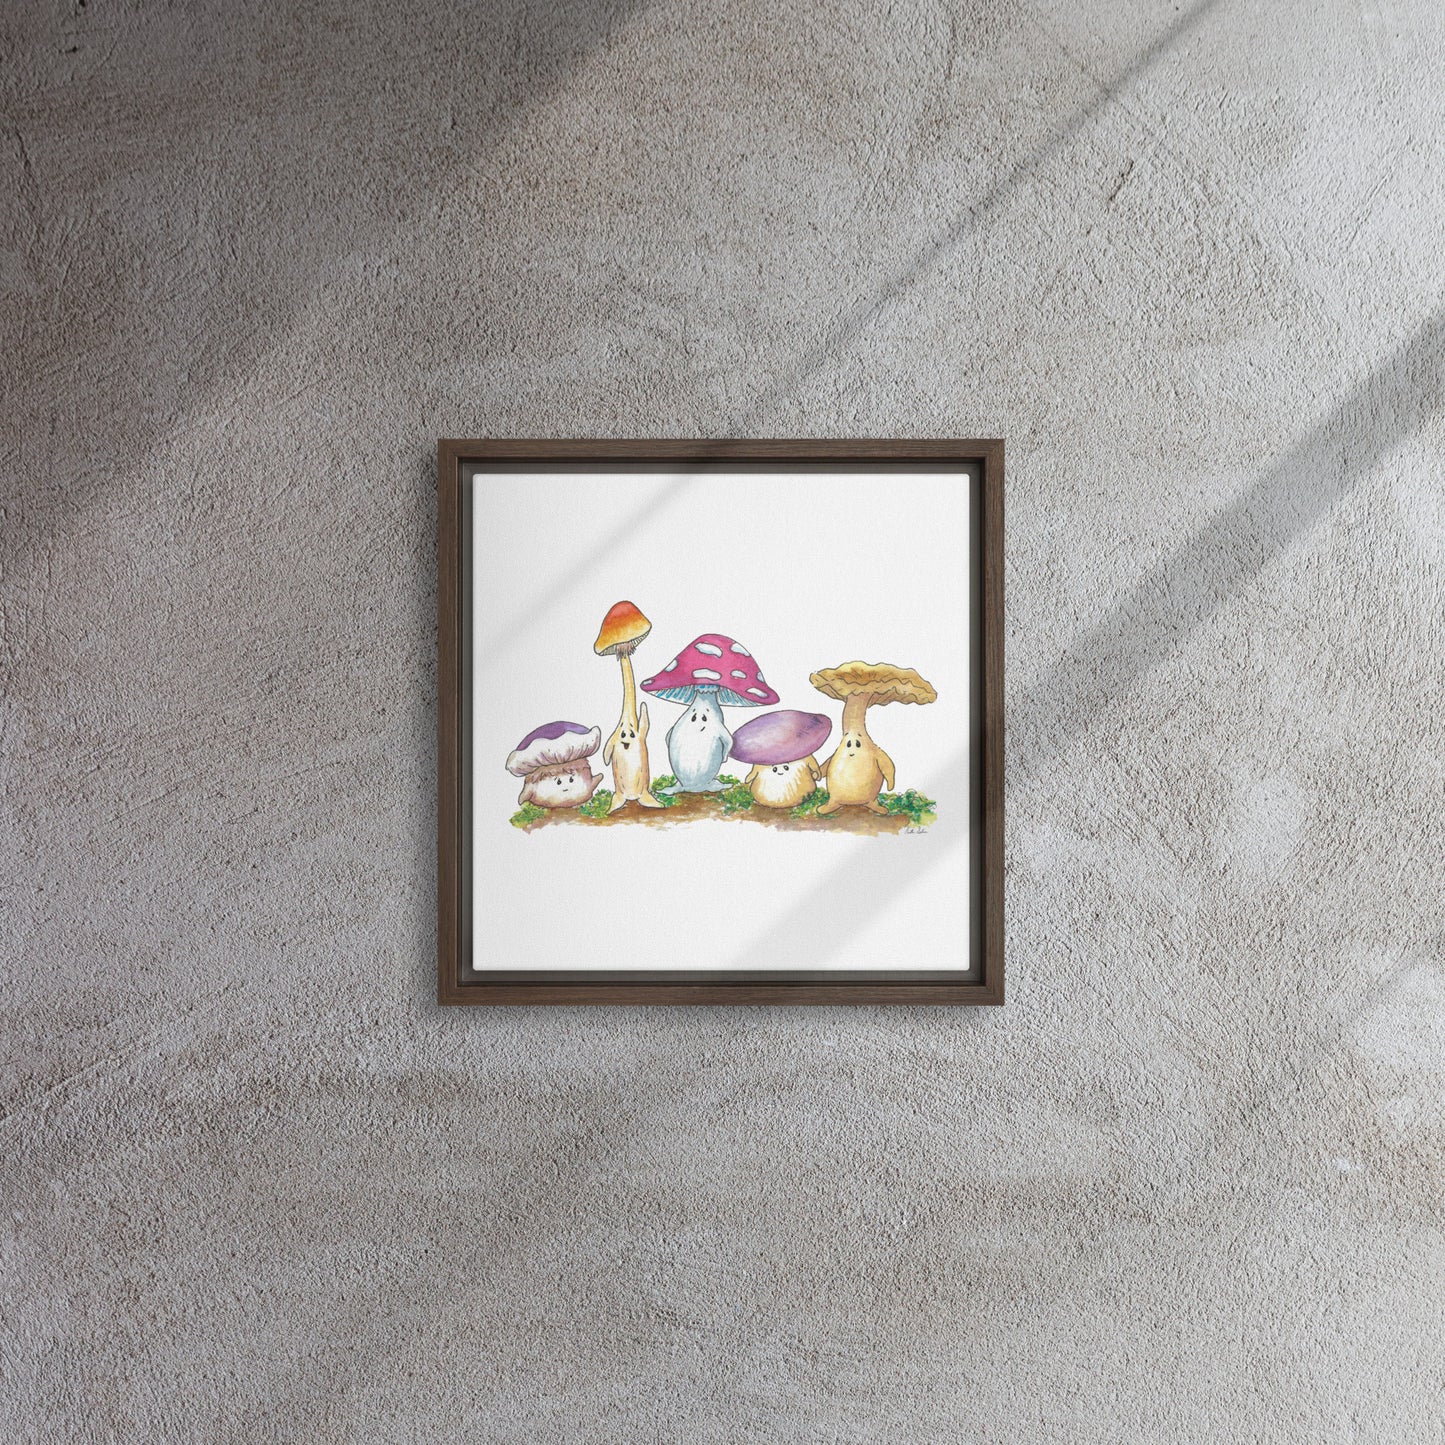 12 by 12 inch canvas print of Heather Silver's watercolor painting, Mushy and Friends. Framed in a dark brown pine wood frame that gives it a floating canvas effect. Shown on carpet with natural lighting.